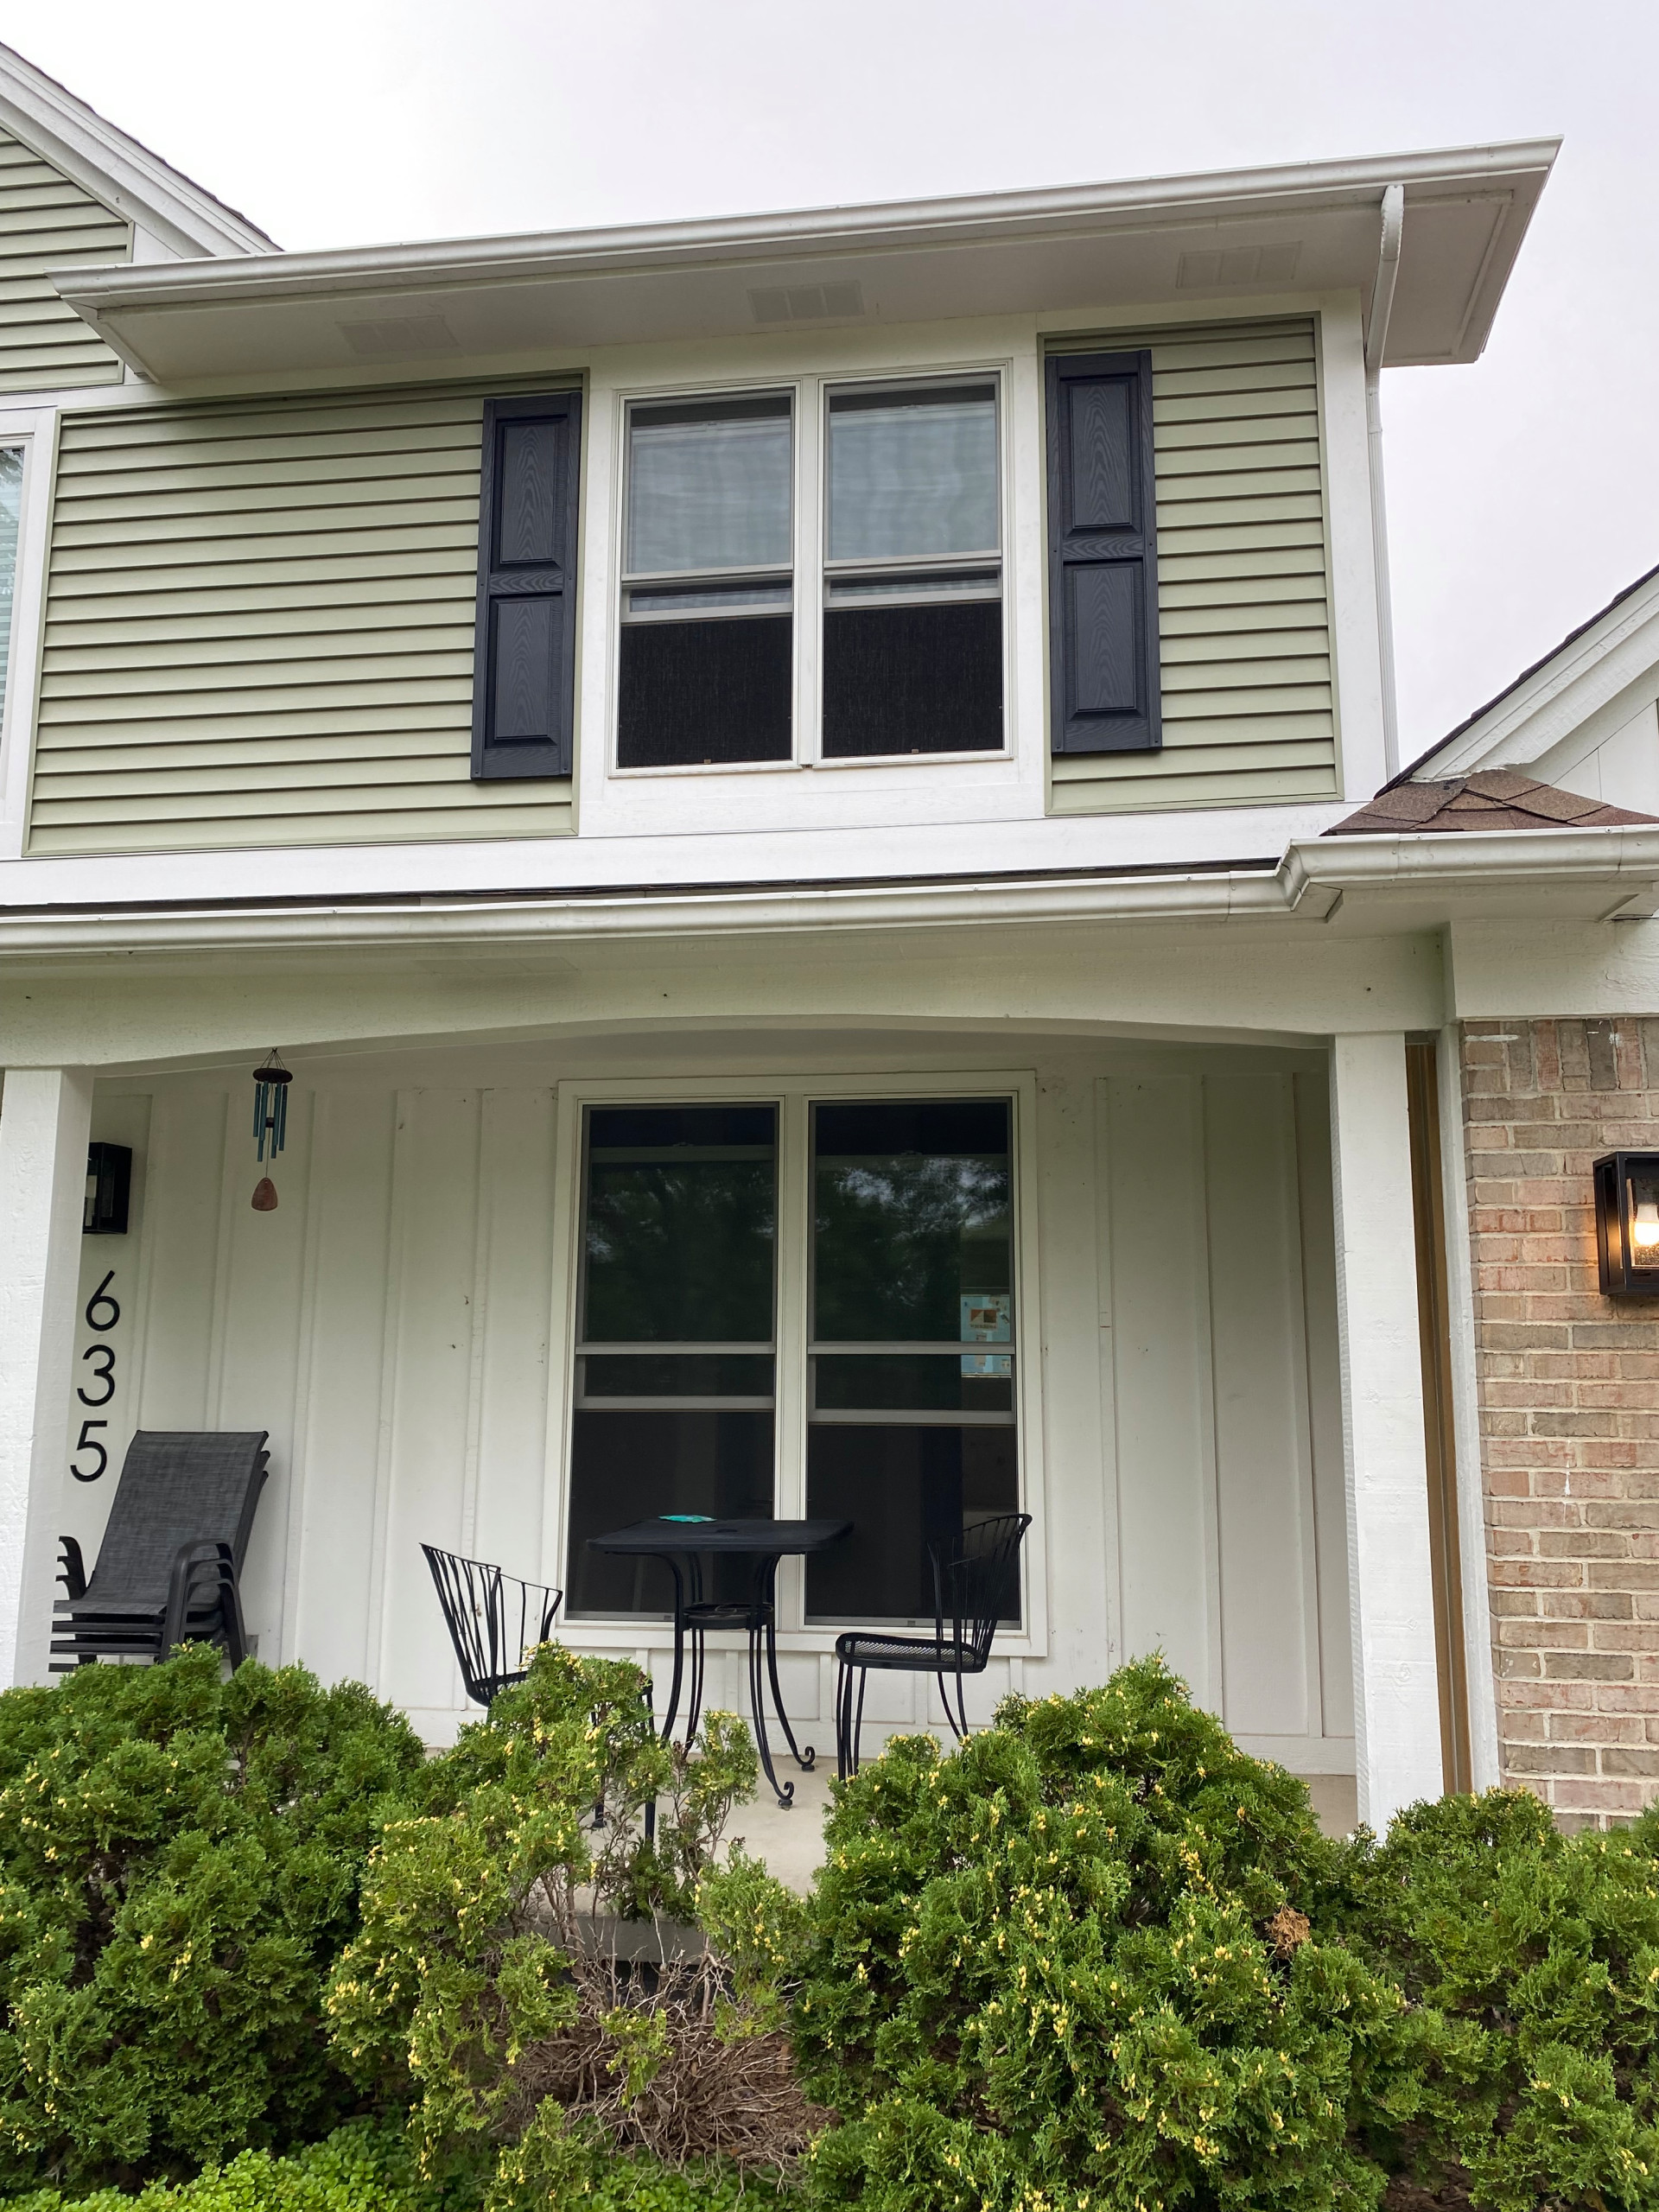 Lake Orion addition with kitchen, baths, office, siding and patio.